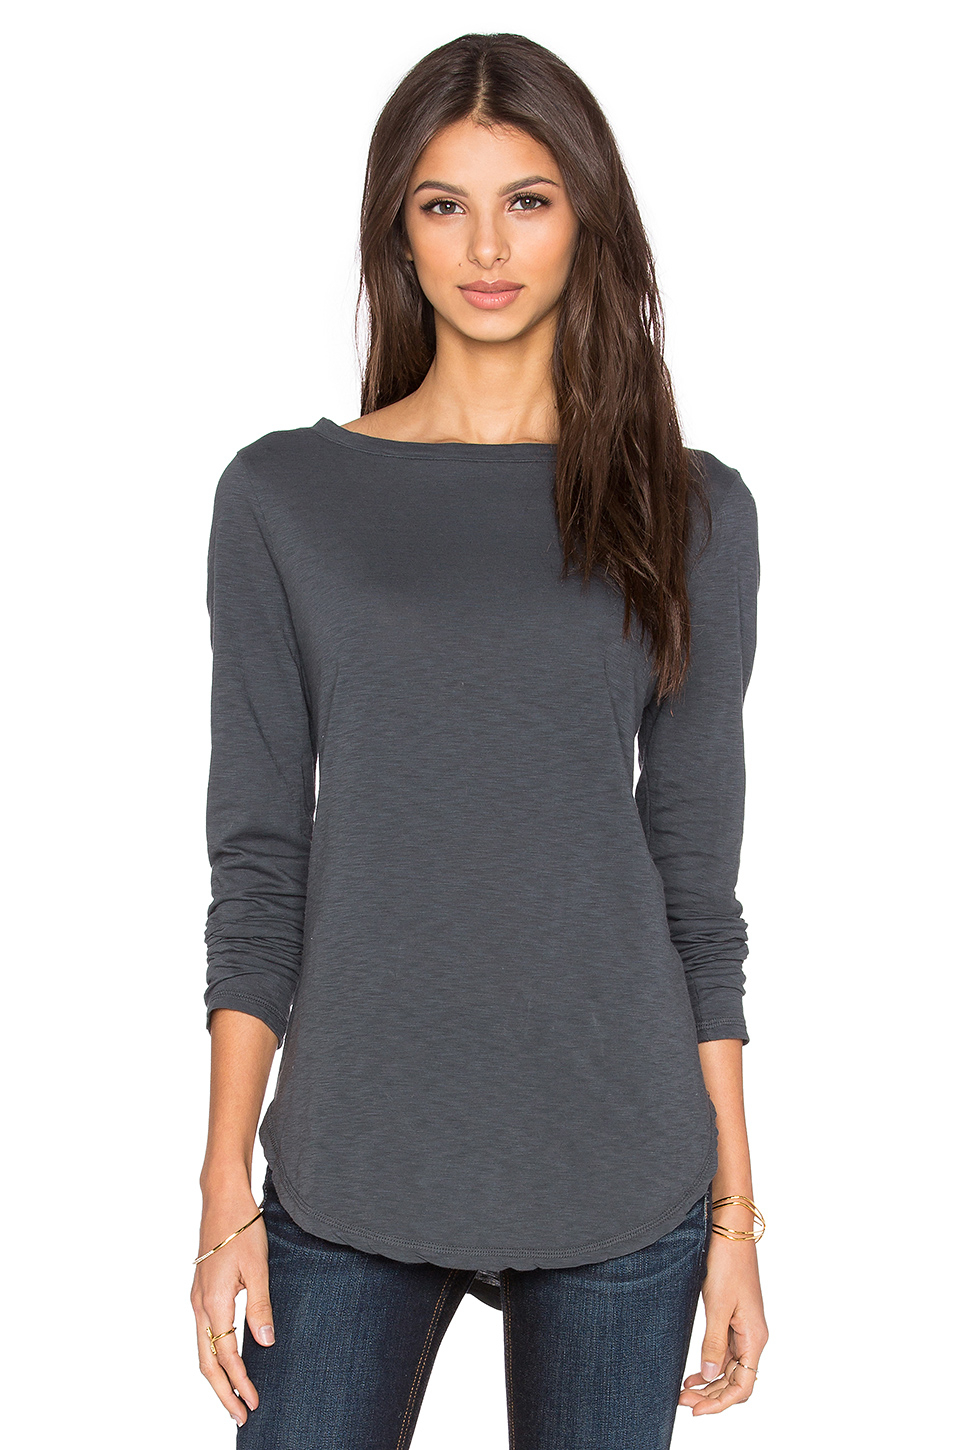 Lyst - Michael Stars Long Sleeve Boatneck Tunic in Gray